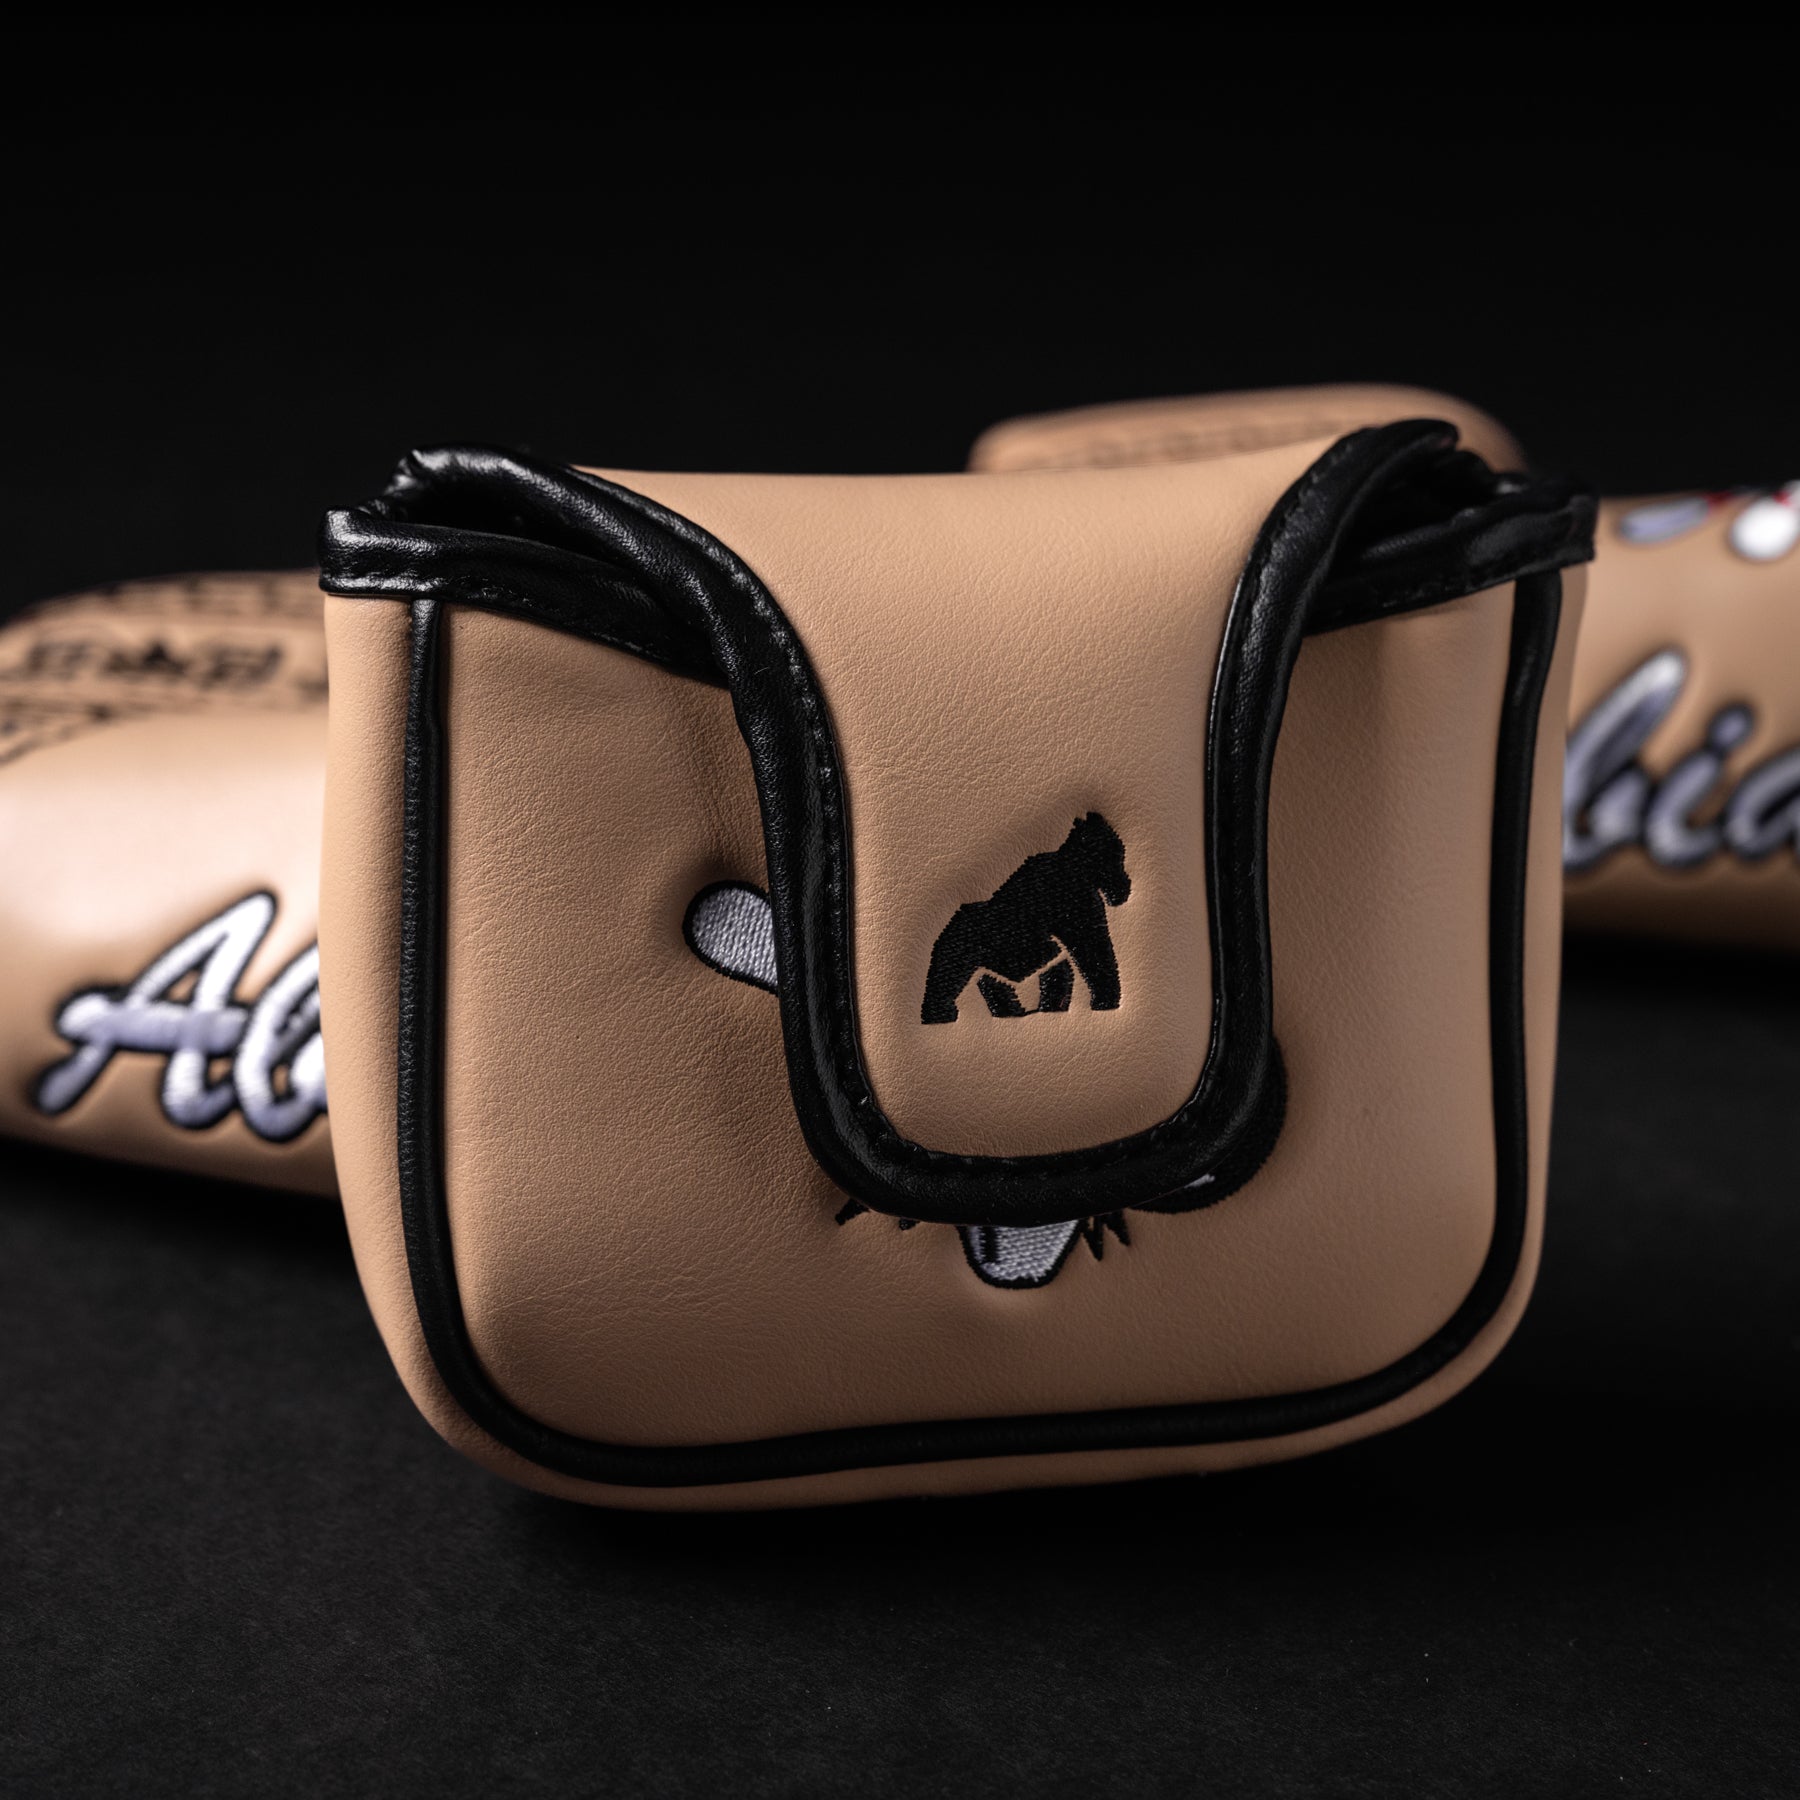 Dude Abides Mallet Putter Cover